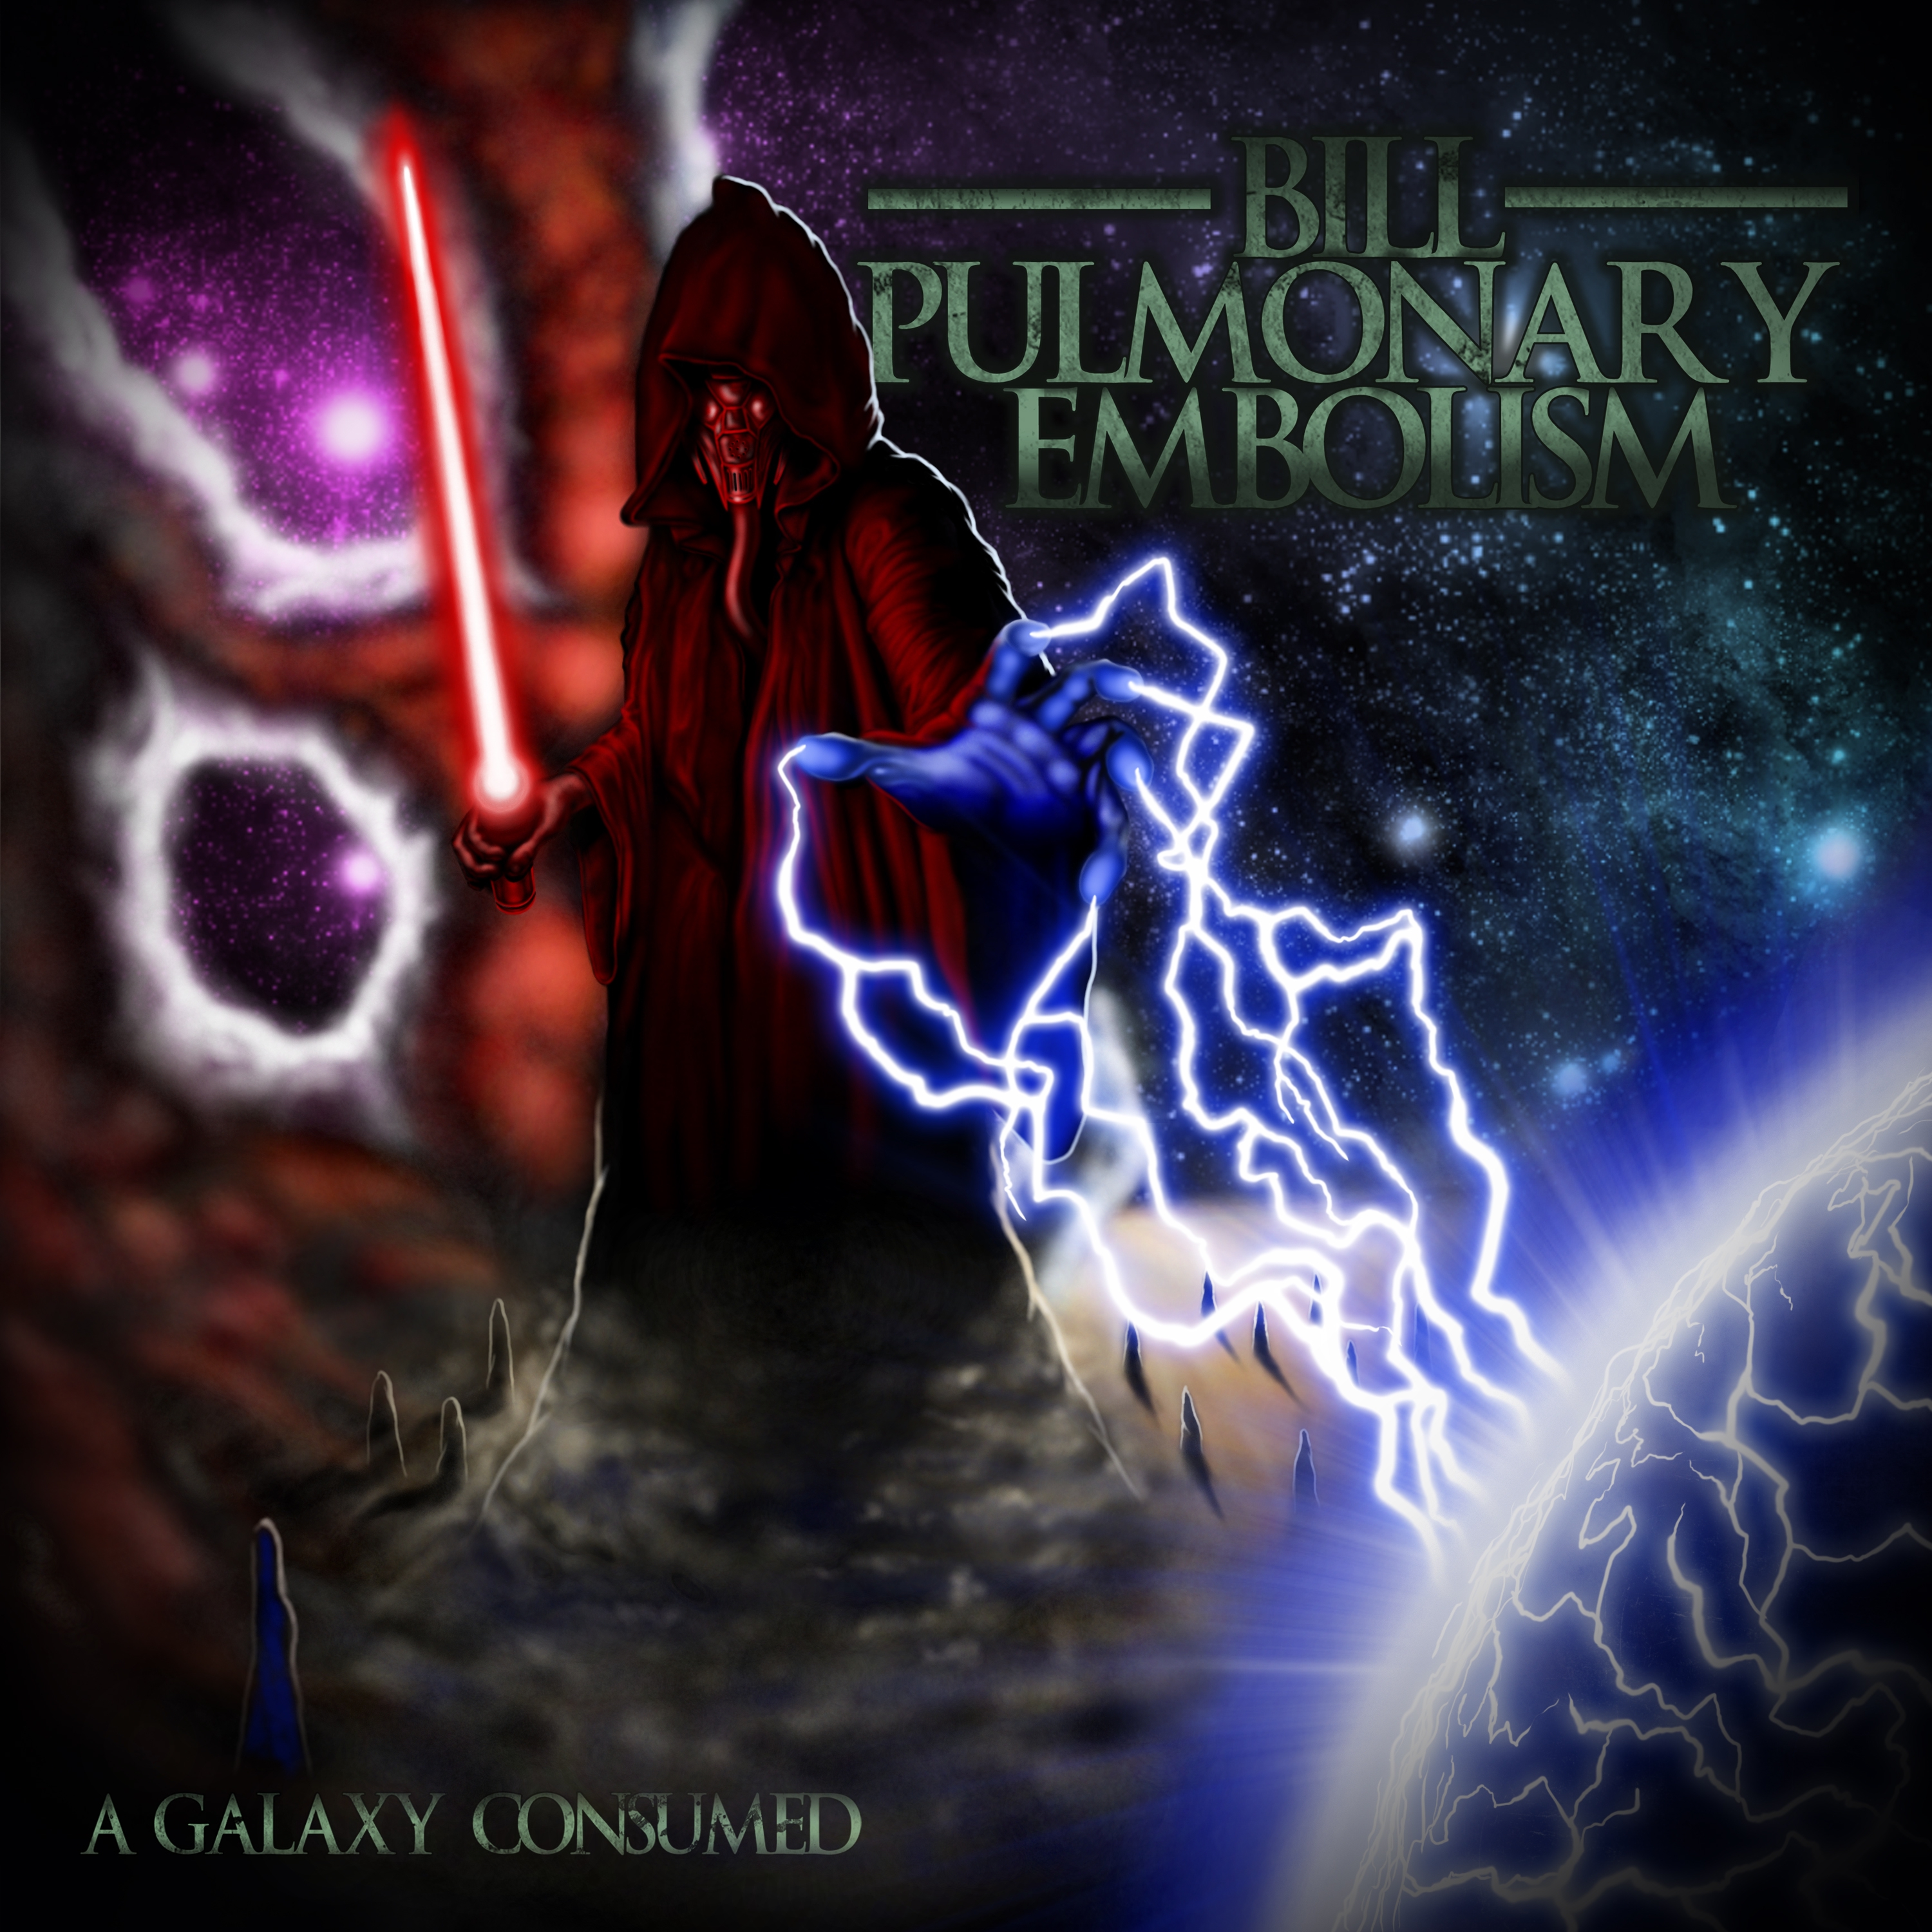 Angry Metal Guy’s Unsigned Band Rodeo: Bill Pulmonary Embolism – A Galaxy Consumed